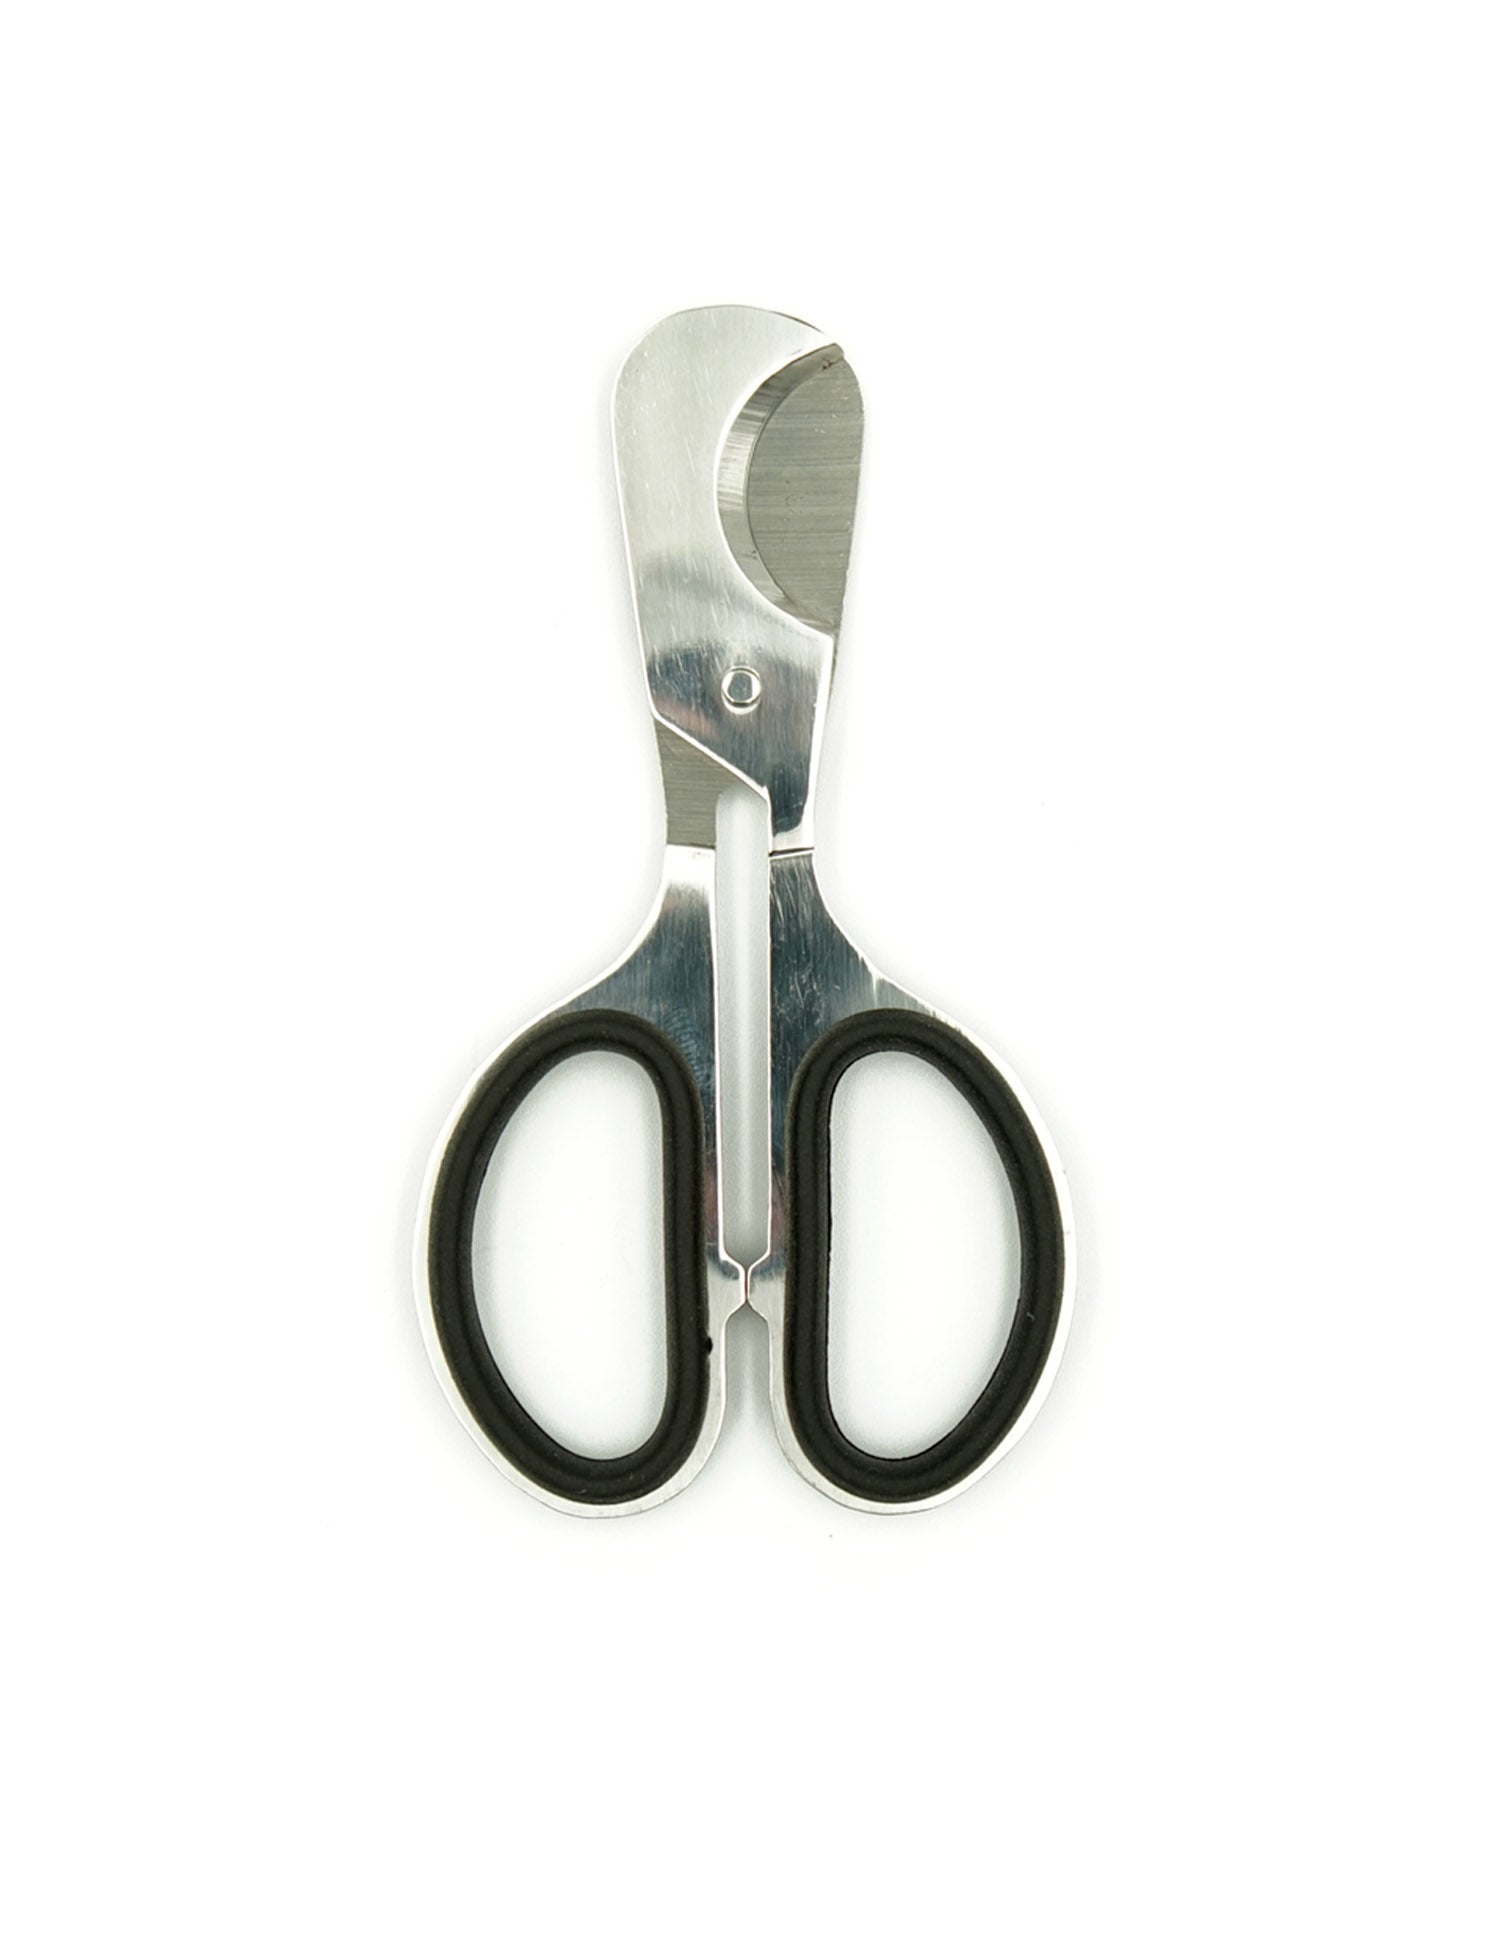 Cutter S/S Scissors with Rubber Grips